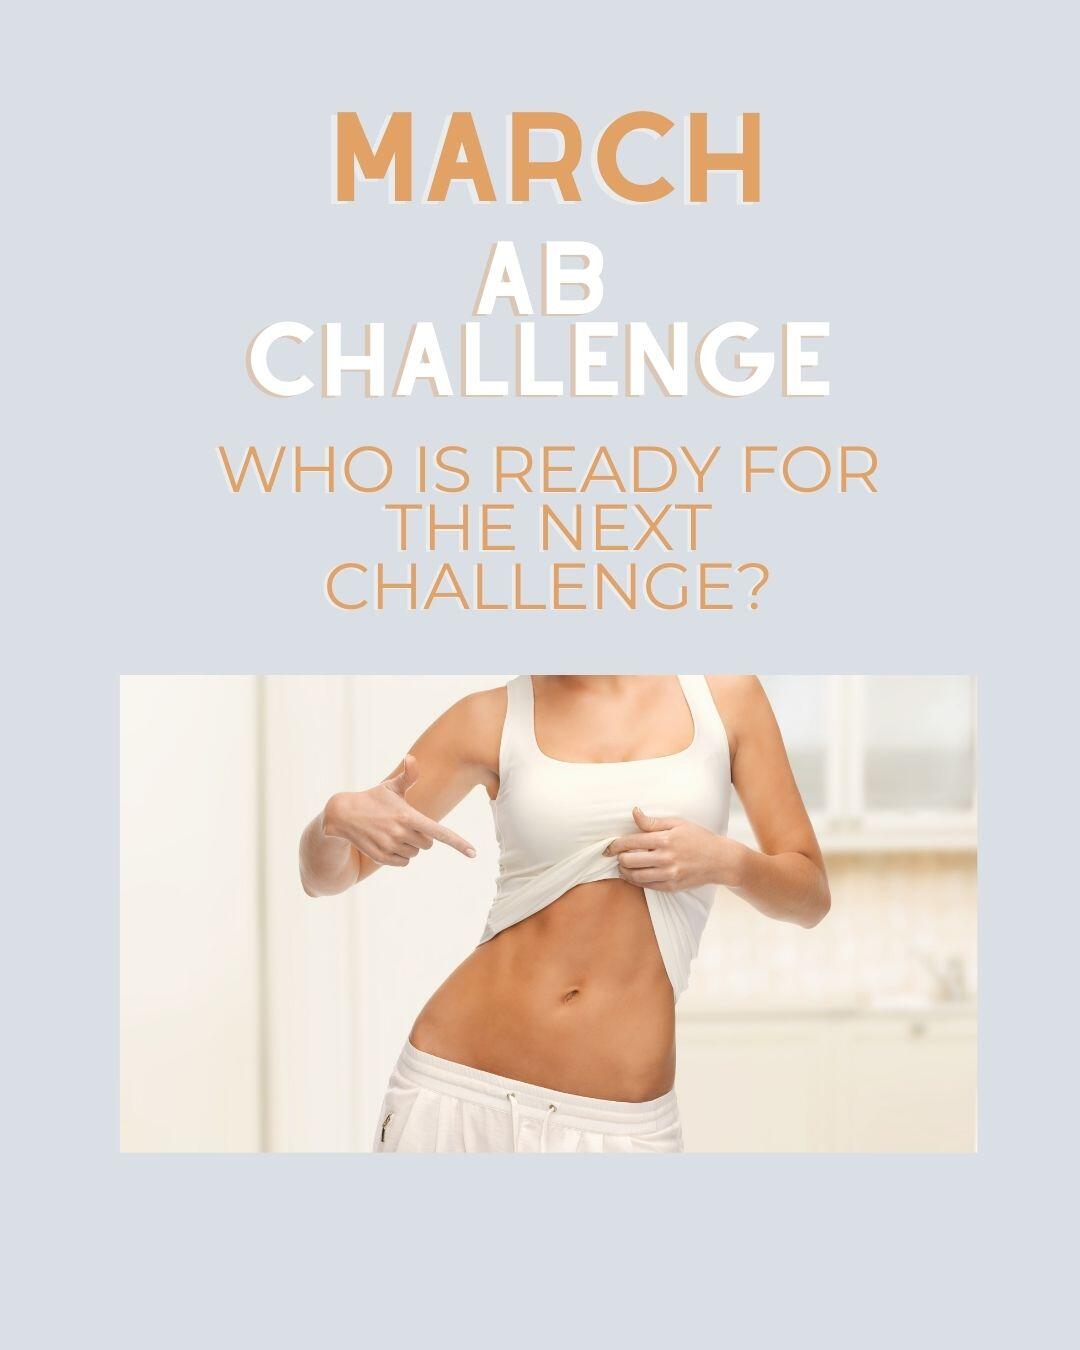 Join Us for the March 31 Day Ab Challenge. Five Exercise that increase reps over 31 days with a weekly schedule that is easy to follow.